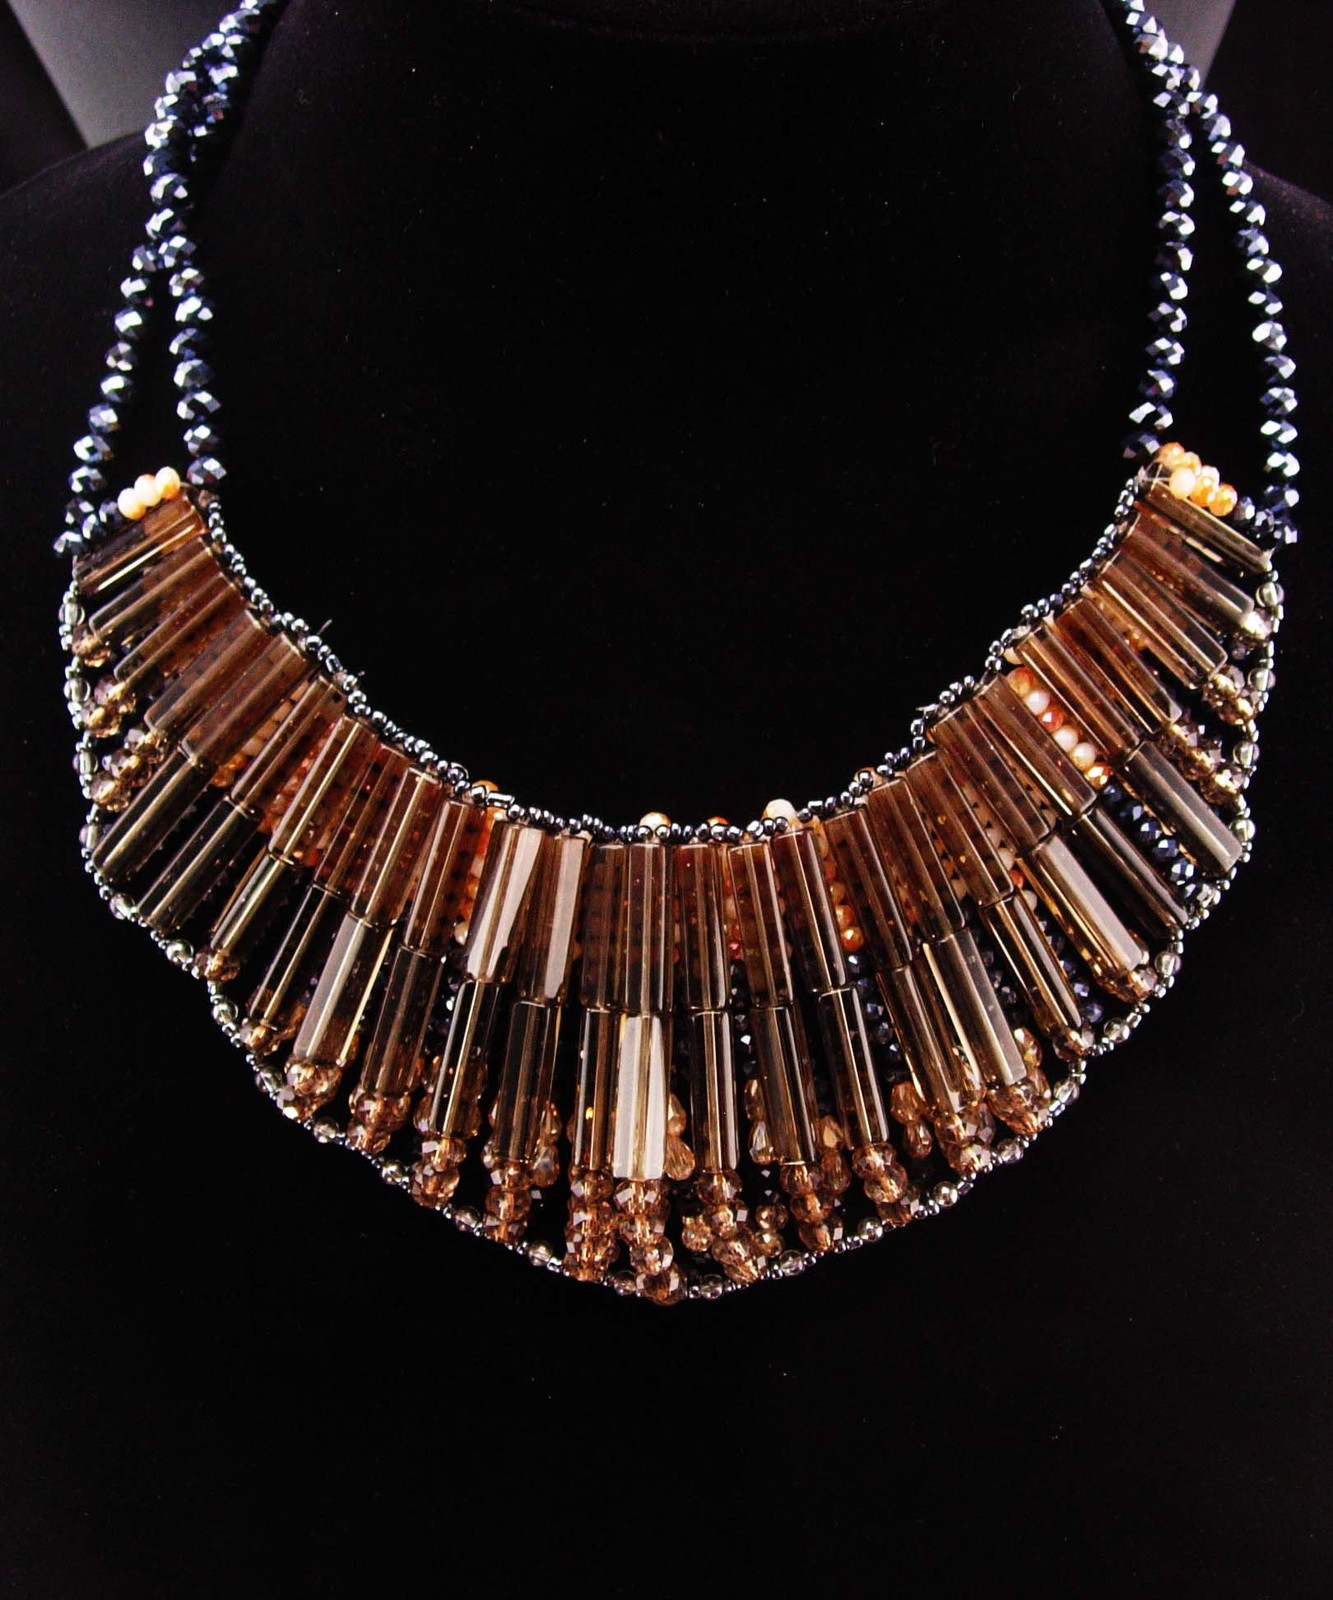 Primary image for Dramatic glass bib designer Necklace - cleopatra collar - 100s of glass beads - 